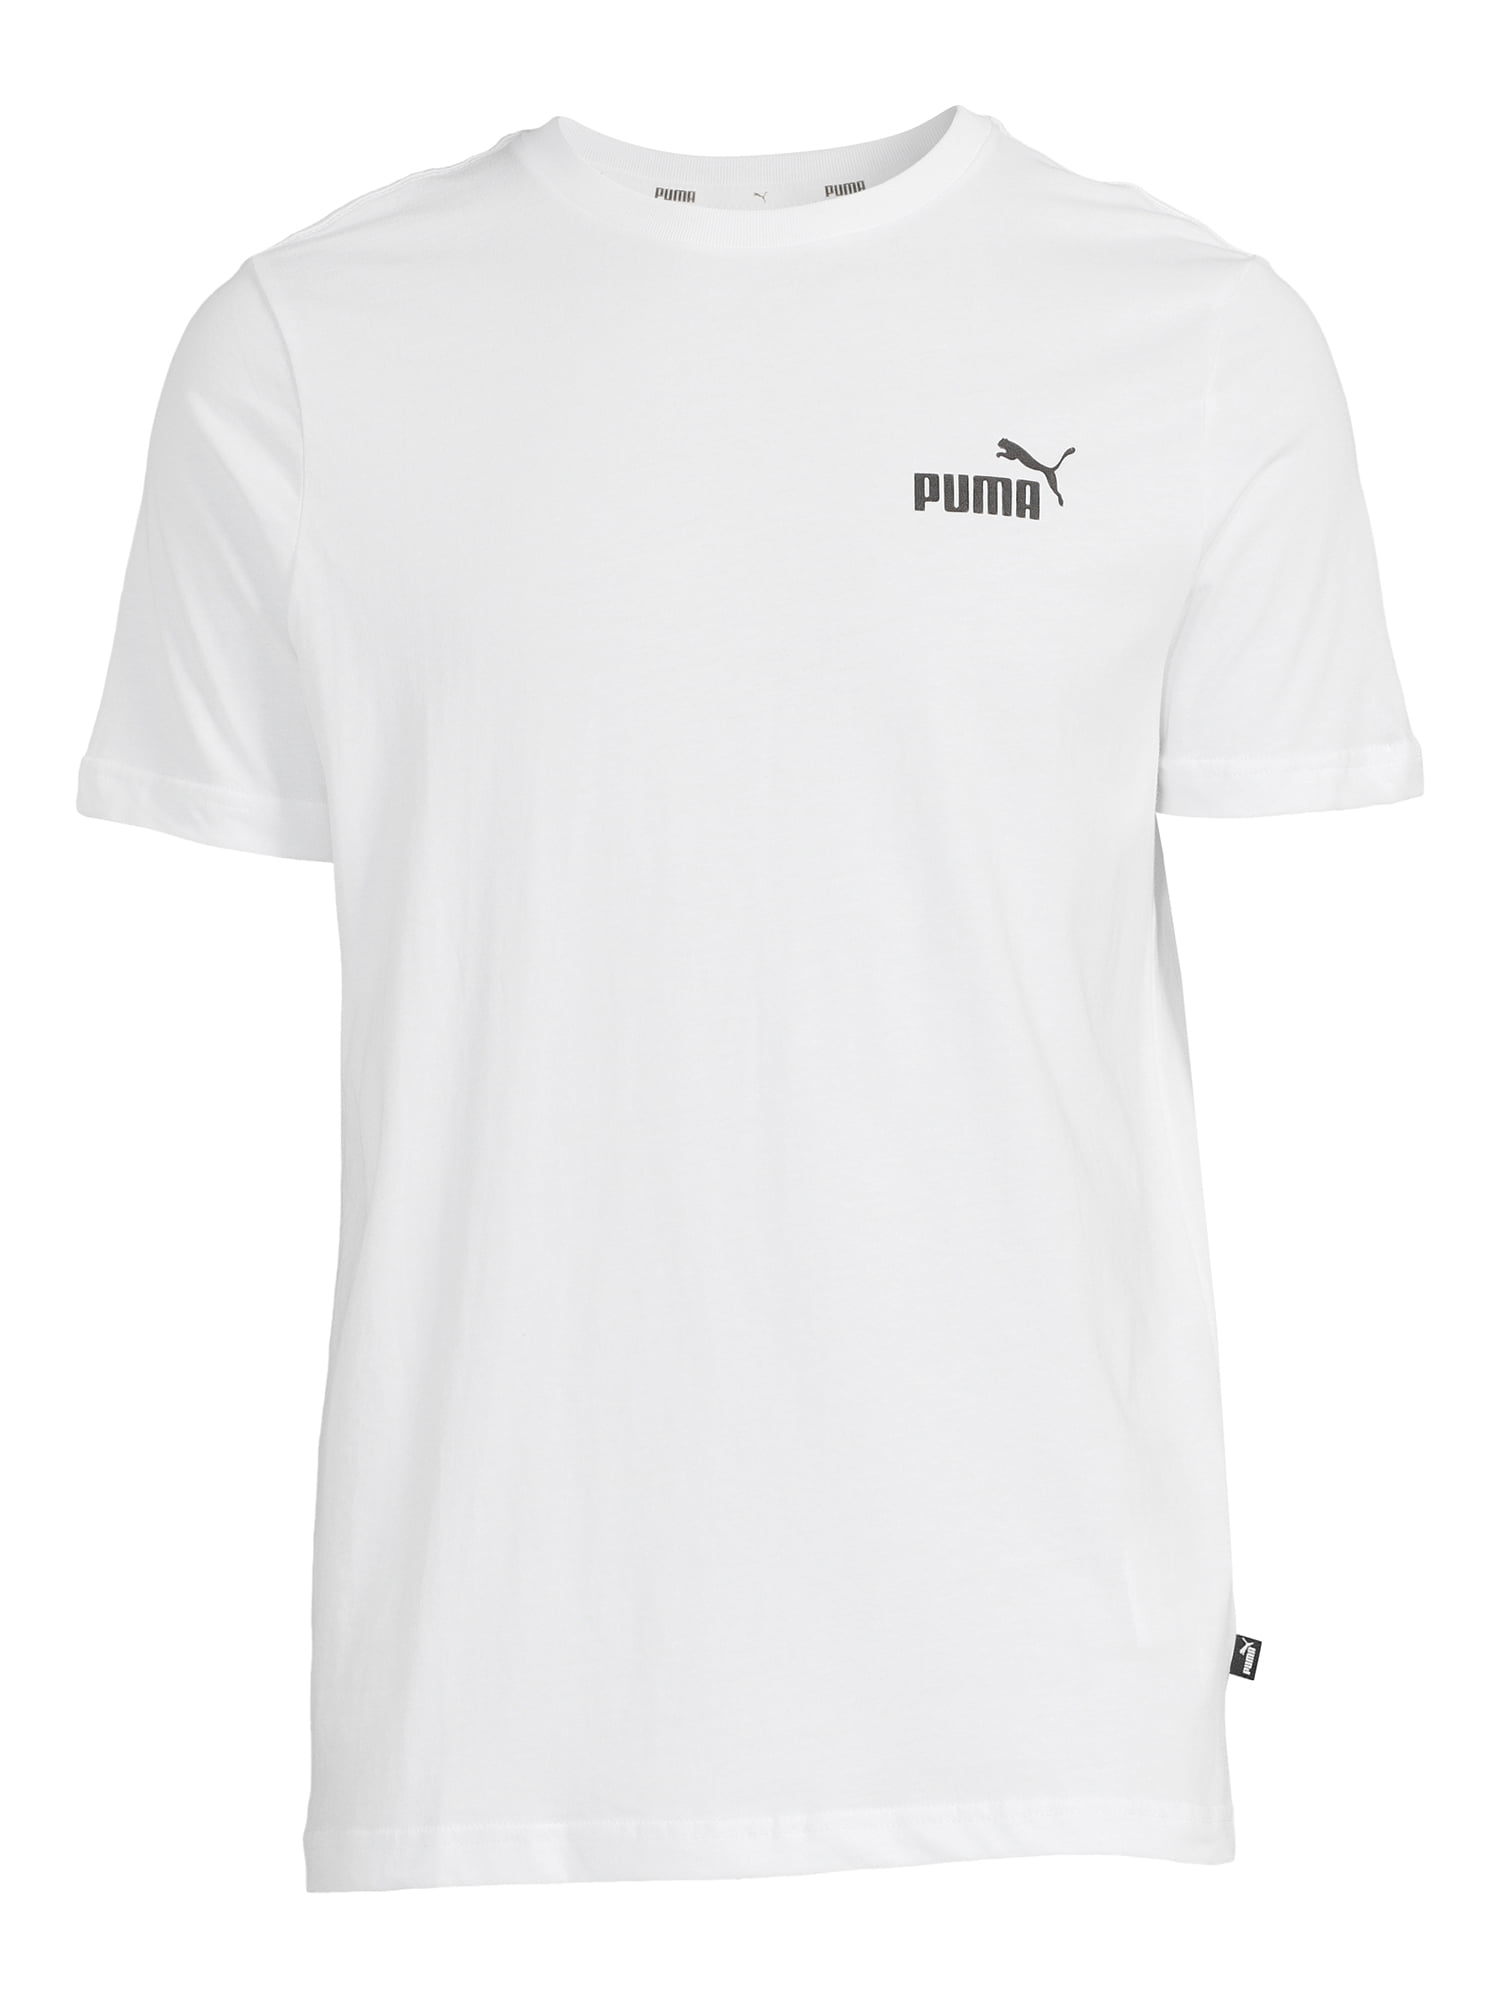 S Shirt, and Essential Logo Big PUMA Men\'s Tee sizes to Chest Men\'s 2XL